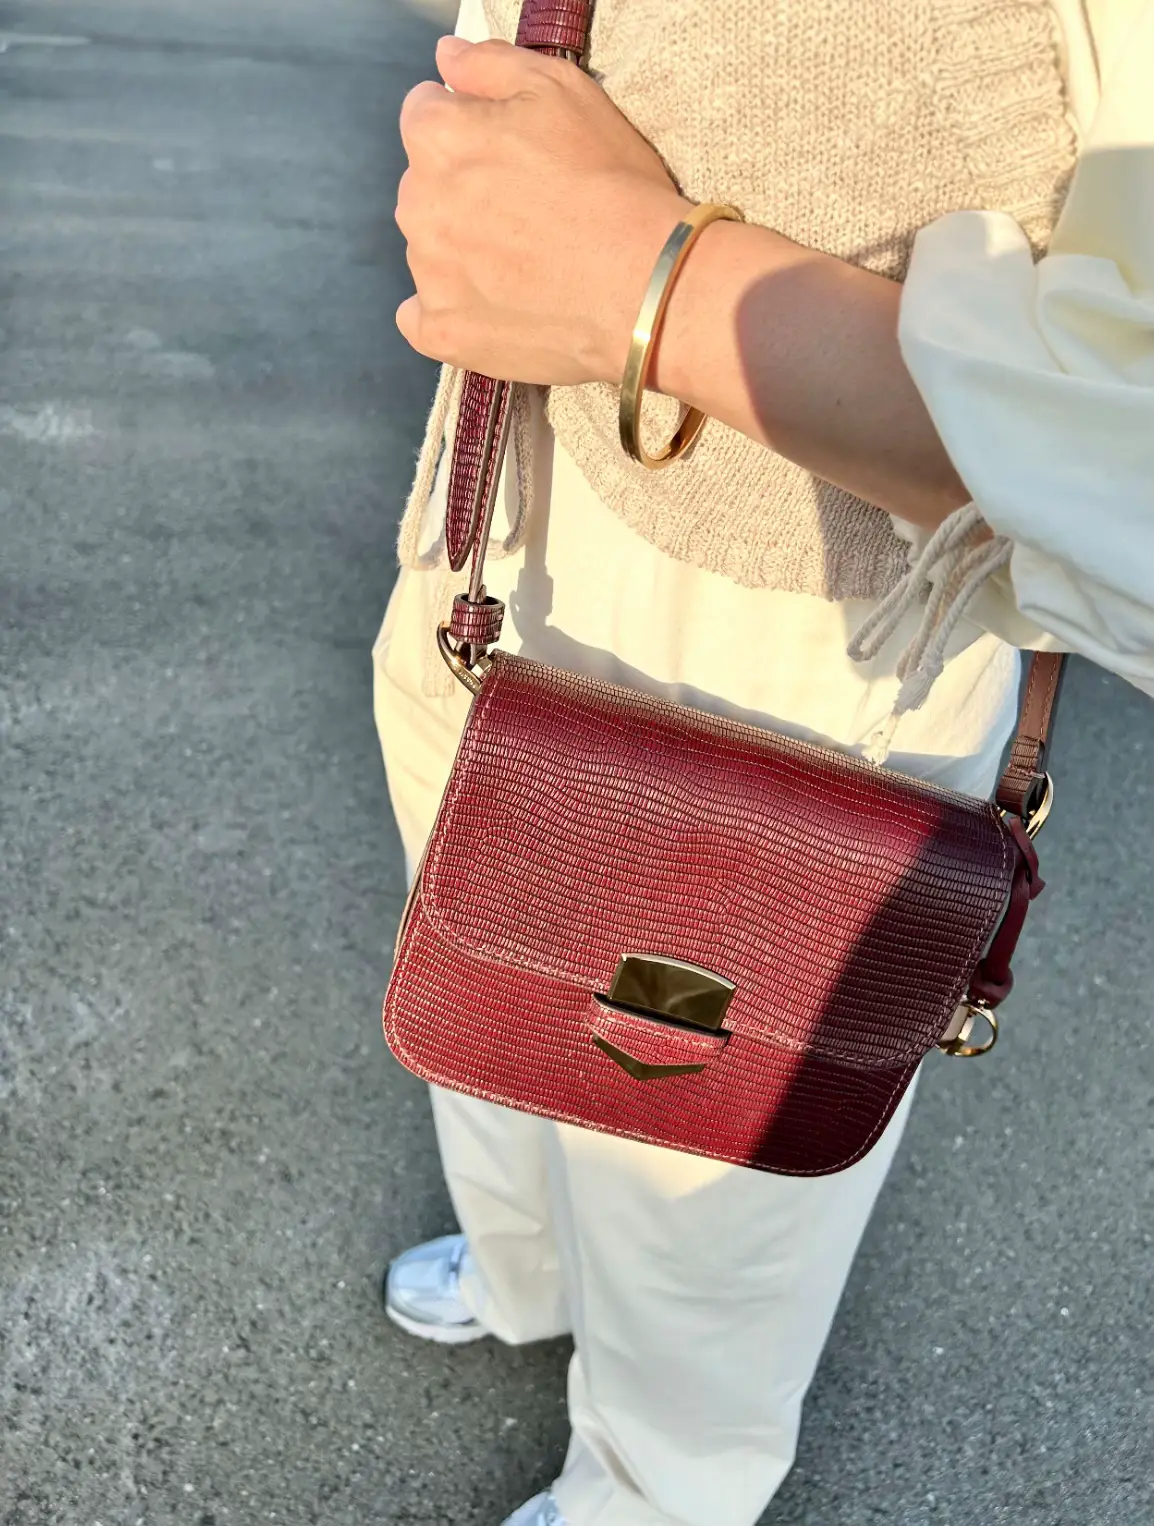 COORDER WITH FOSSIL MESSENGER BAG | Gallery posted by Ma | Lemon8